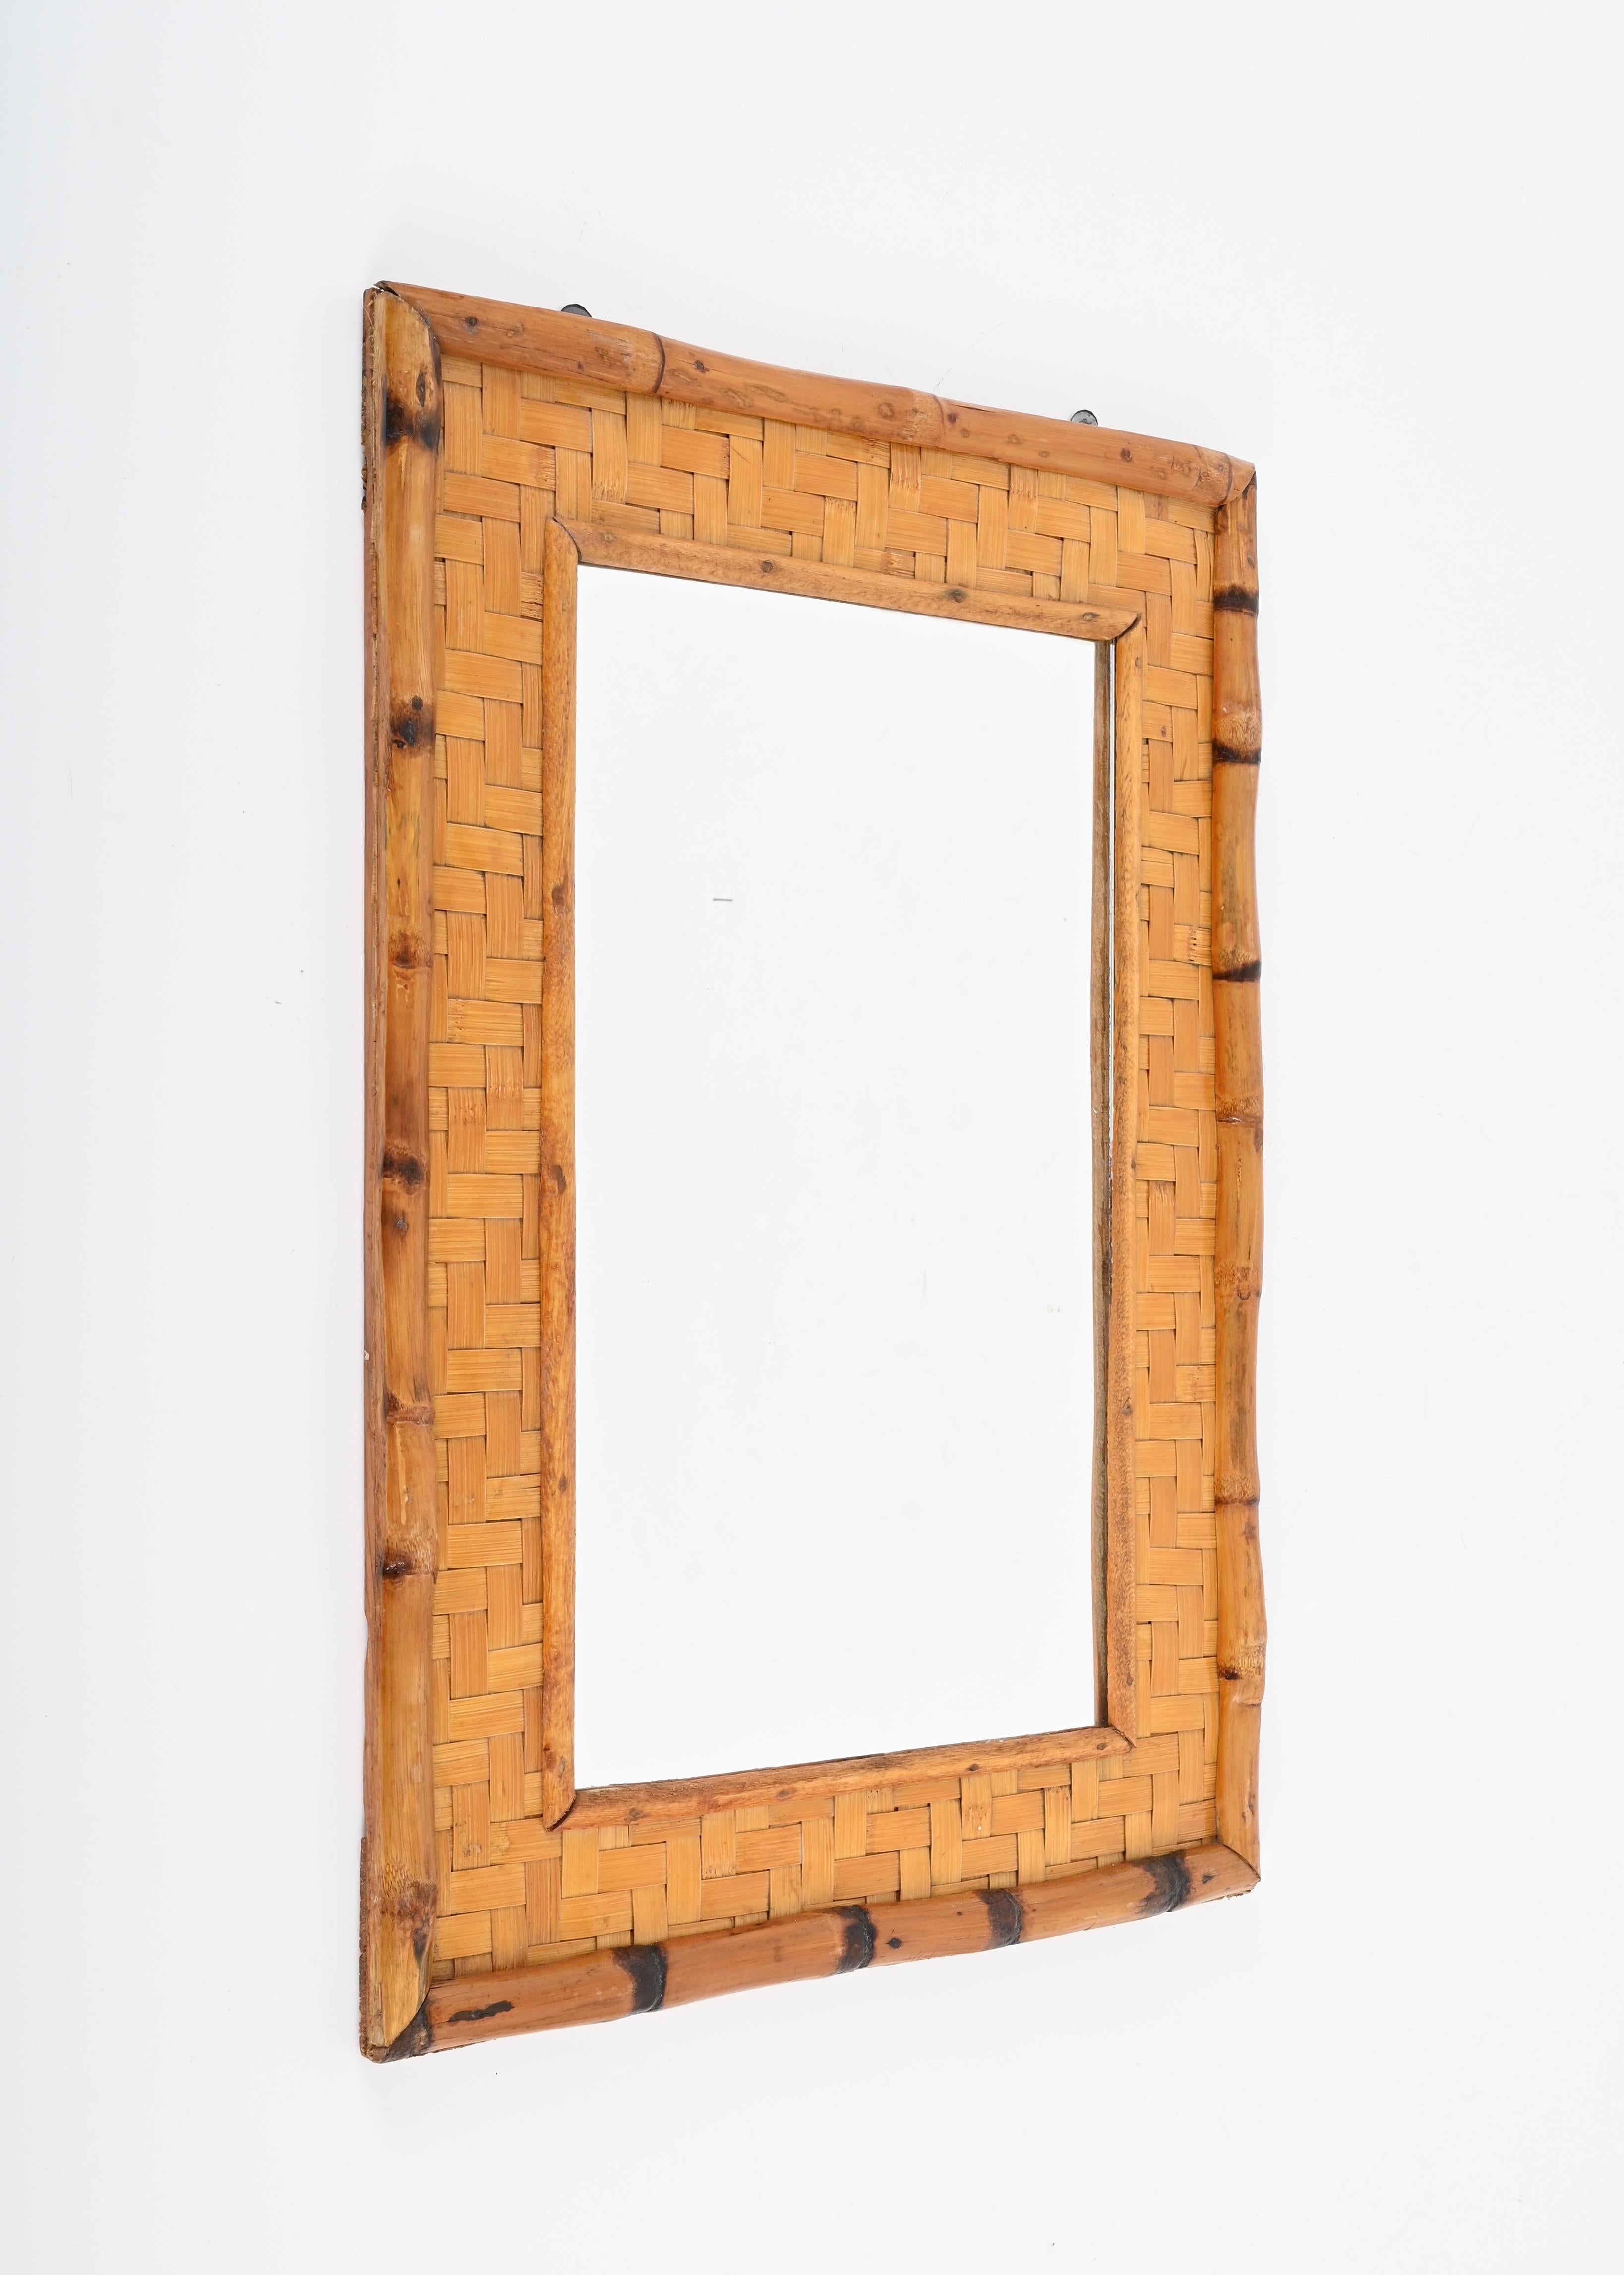 Astonishing Mid-Century rectangular mirror made in bamboo cane and woven rattan. This fantastic piece was designed in Italy during the 1960s.

This mirror is unique thanks to its stunning double frame,  made of a larger external bamboo frame and a